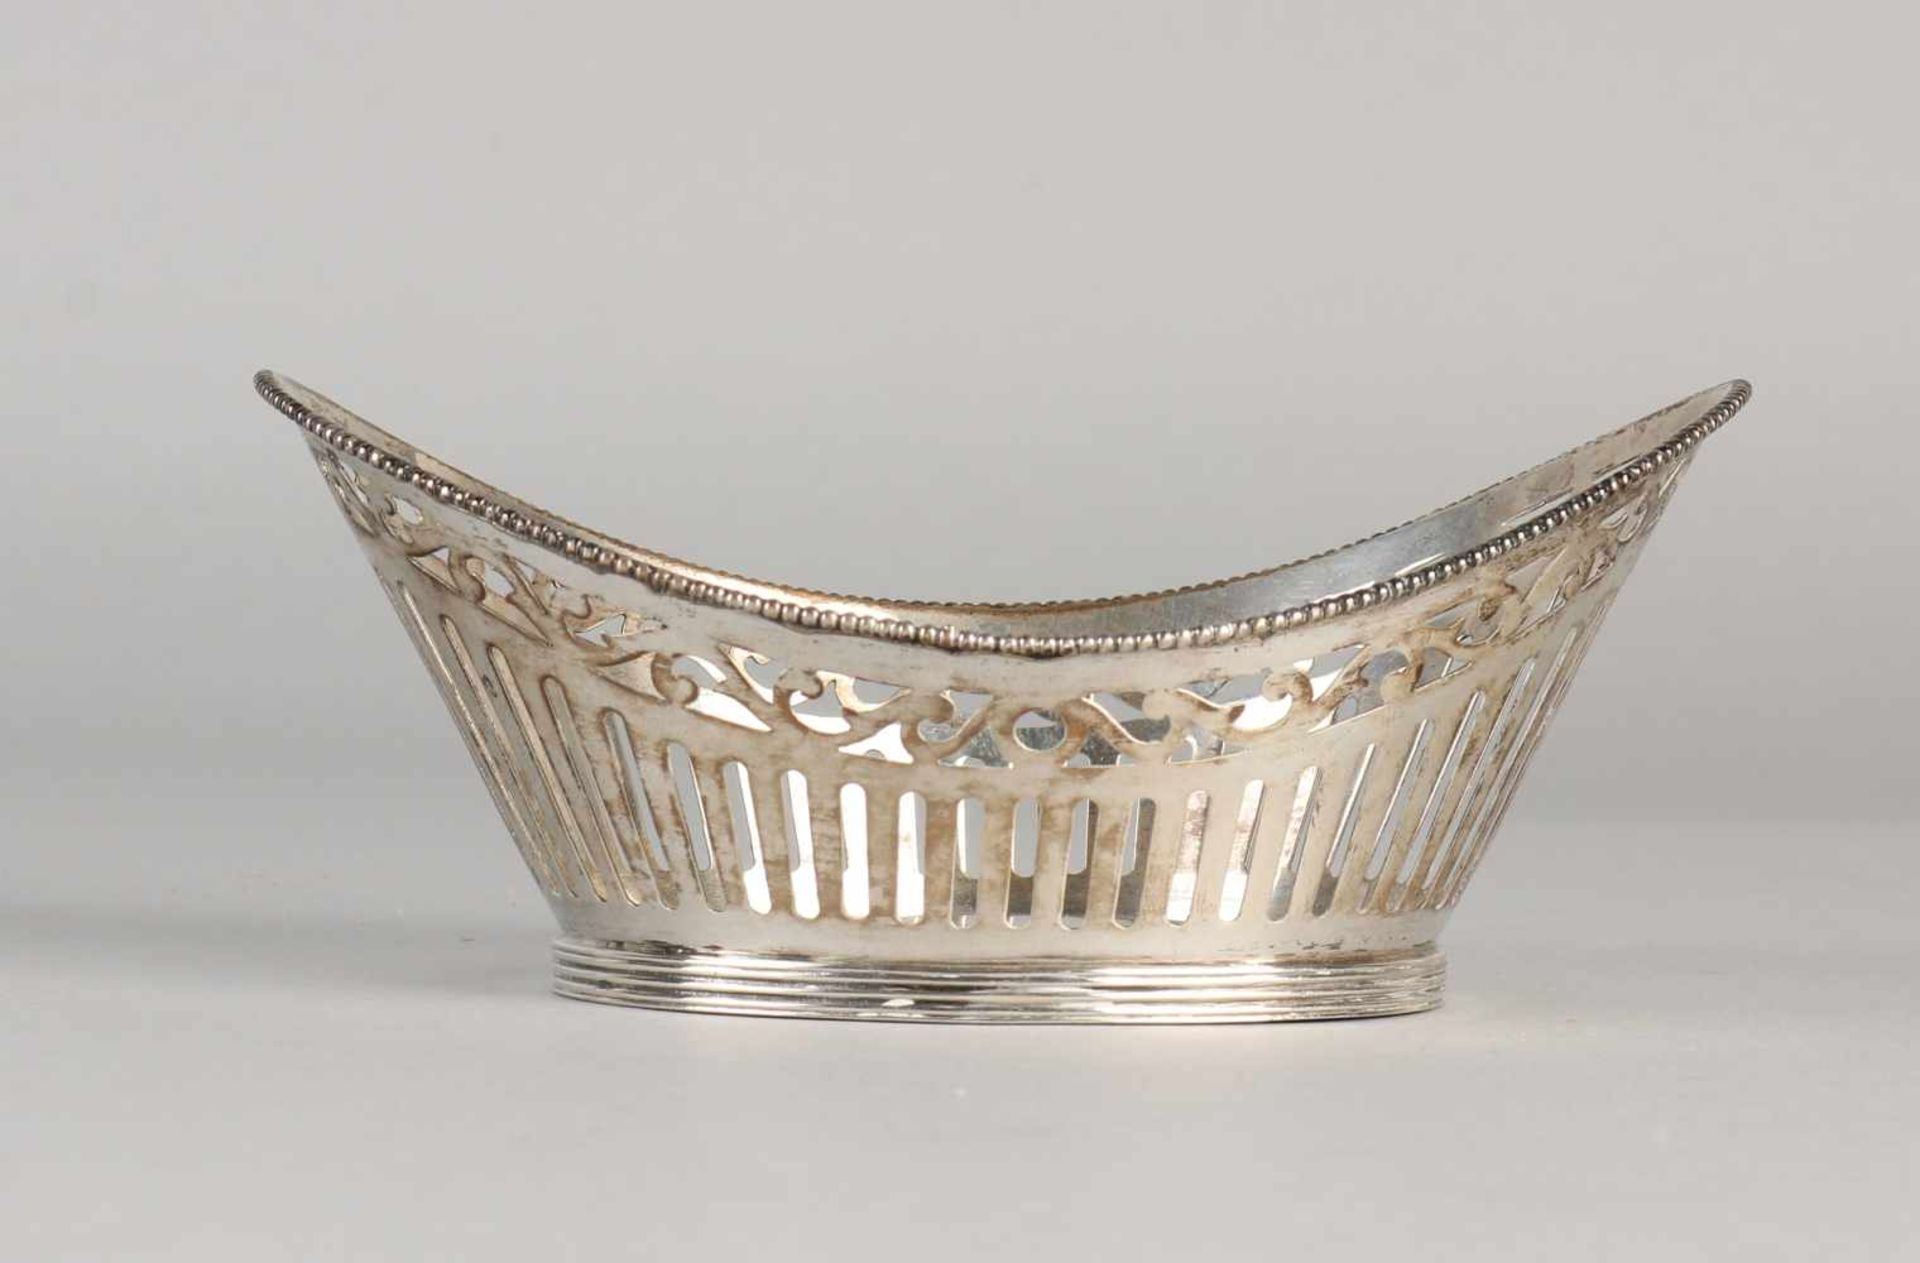 Silver bonbon basket, 835/000, boat-shaped with serrated bars and floral decor. Provided with a - Bild 2 aus 2